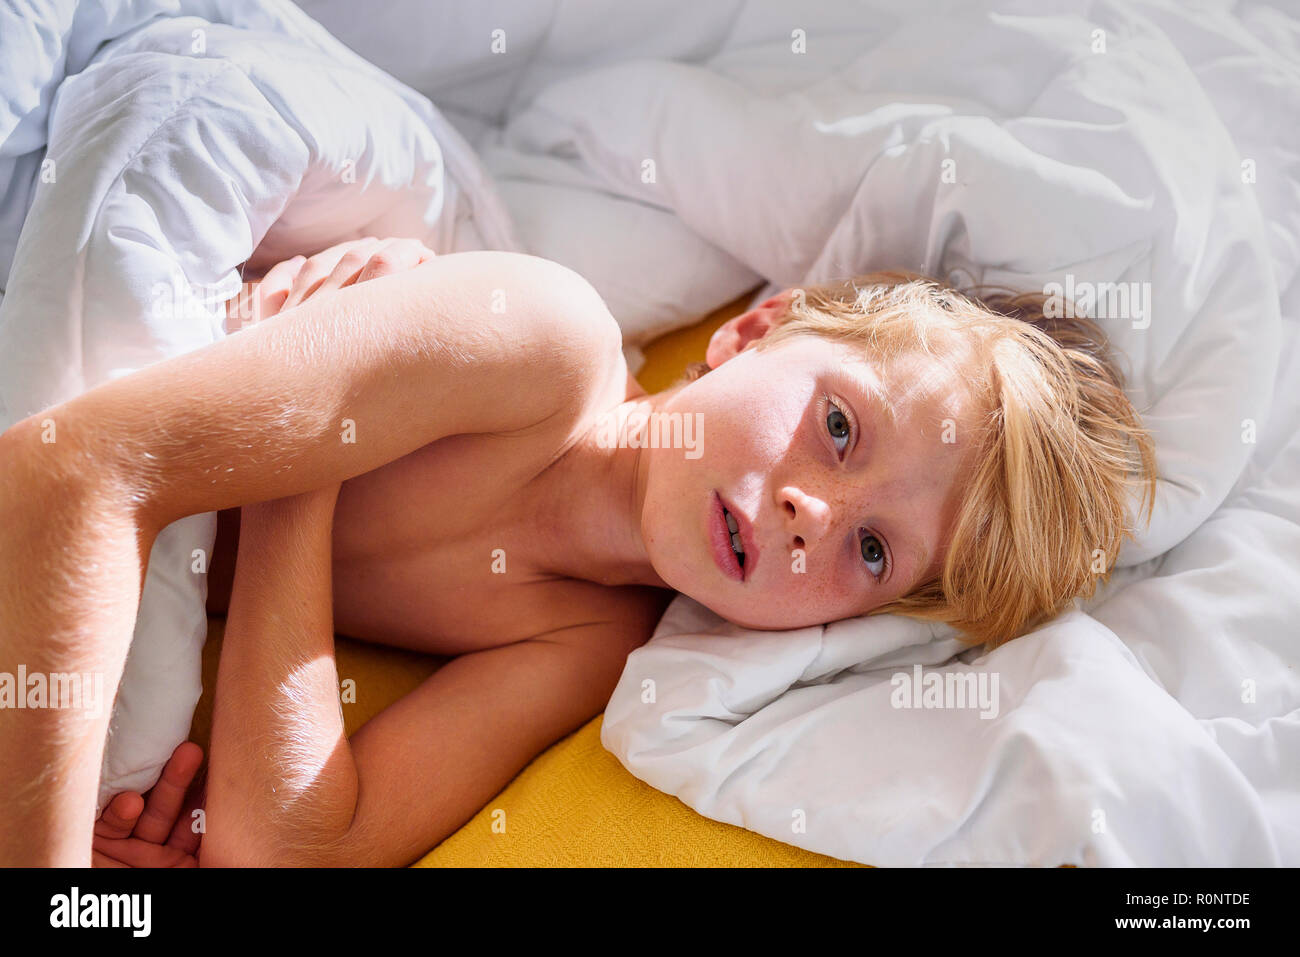 Overhead view of a boy lying in bed Stock Photo